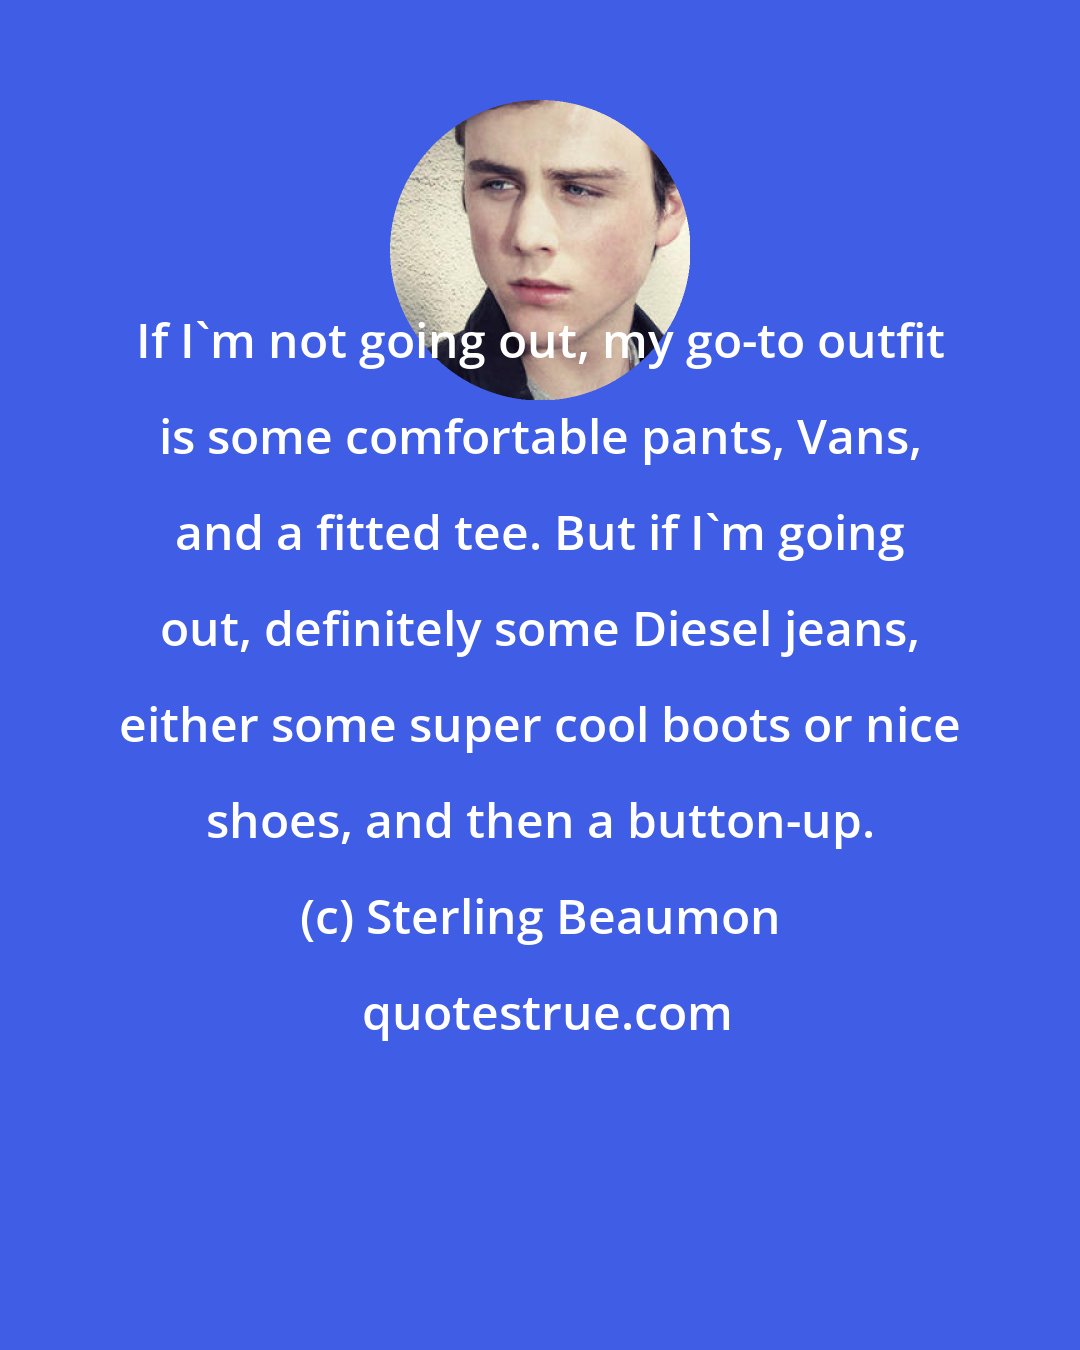 Sterling Beaumon: If I'm not going out, my go-to outfit is some comfortable pants, Vans, and a fitted tee. But if I'm going out, definitely some Diesel jeans, either some super cool boots or nice shoes, and then a button-up.